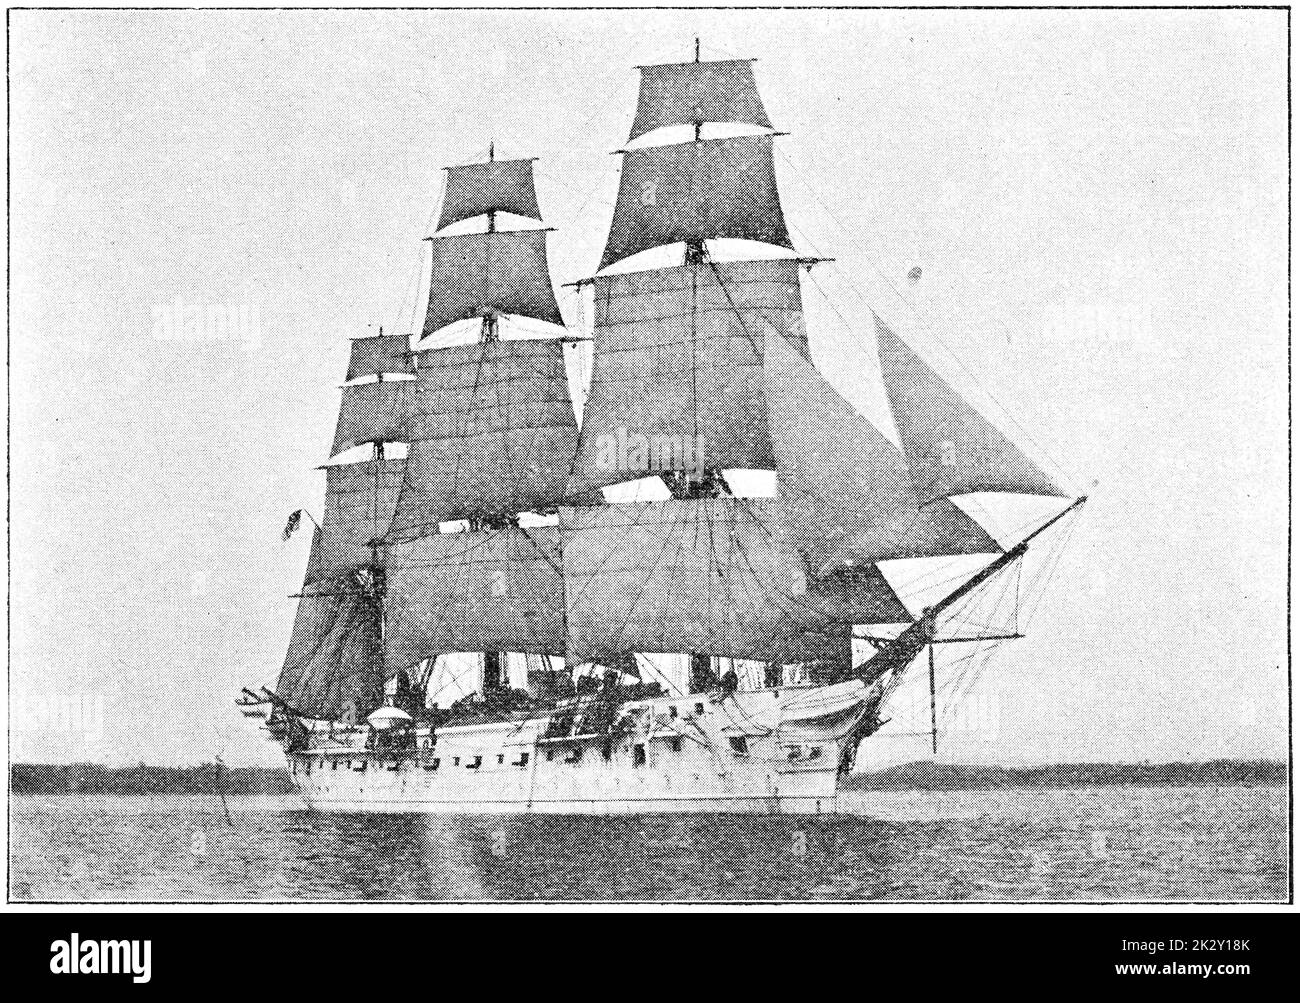 SMS Gneisenau (1879) - a Bismarck-class corvette built for the German Imperial Navy. Illustration of the 19th century. Germany. White background. Stock Photo